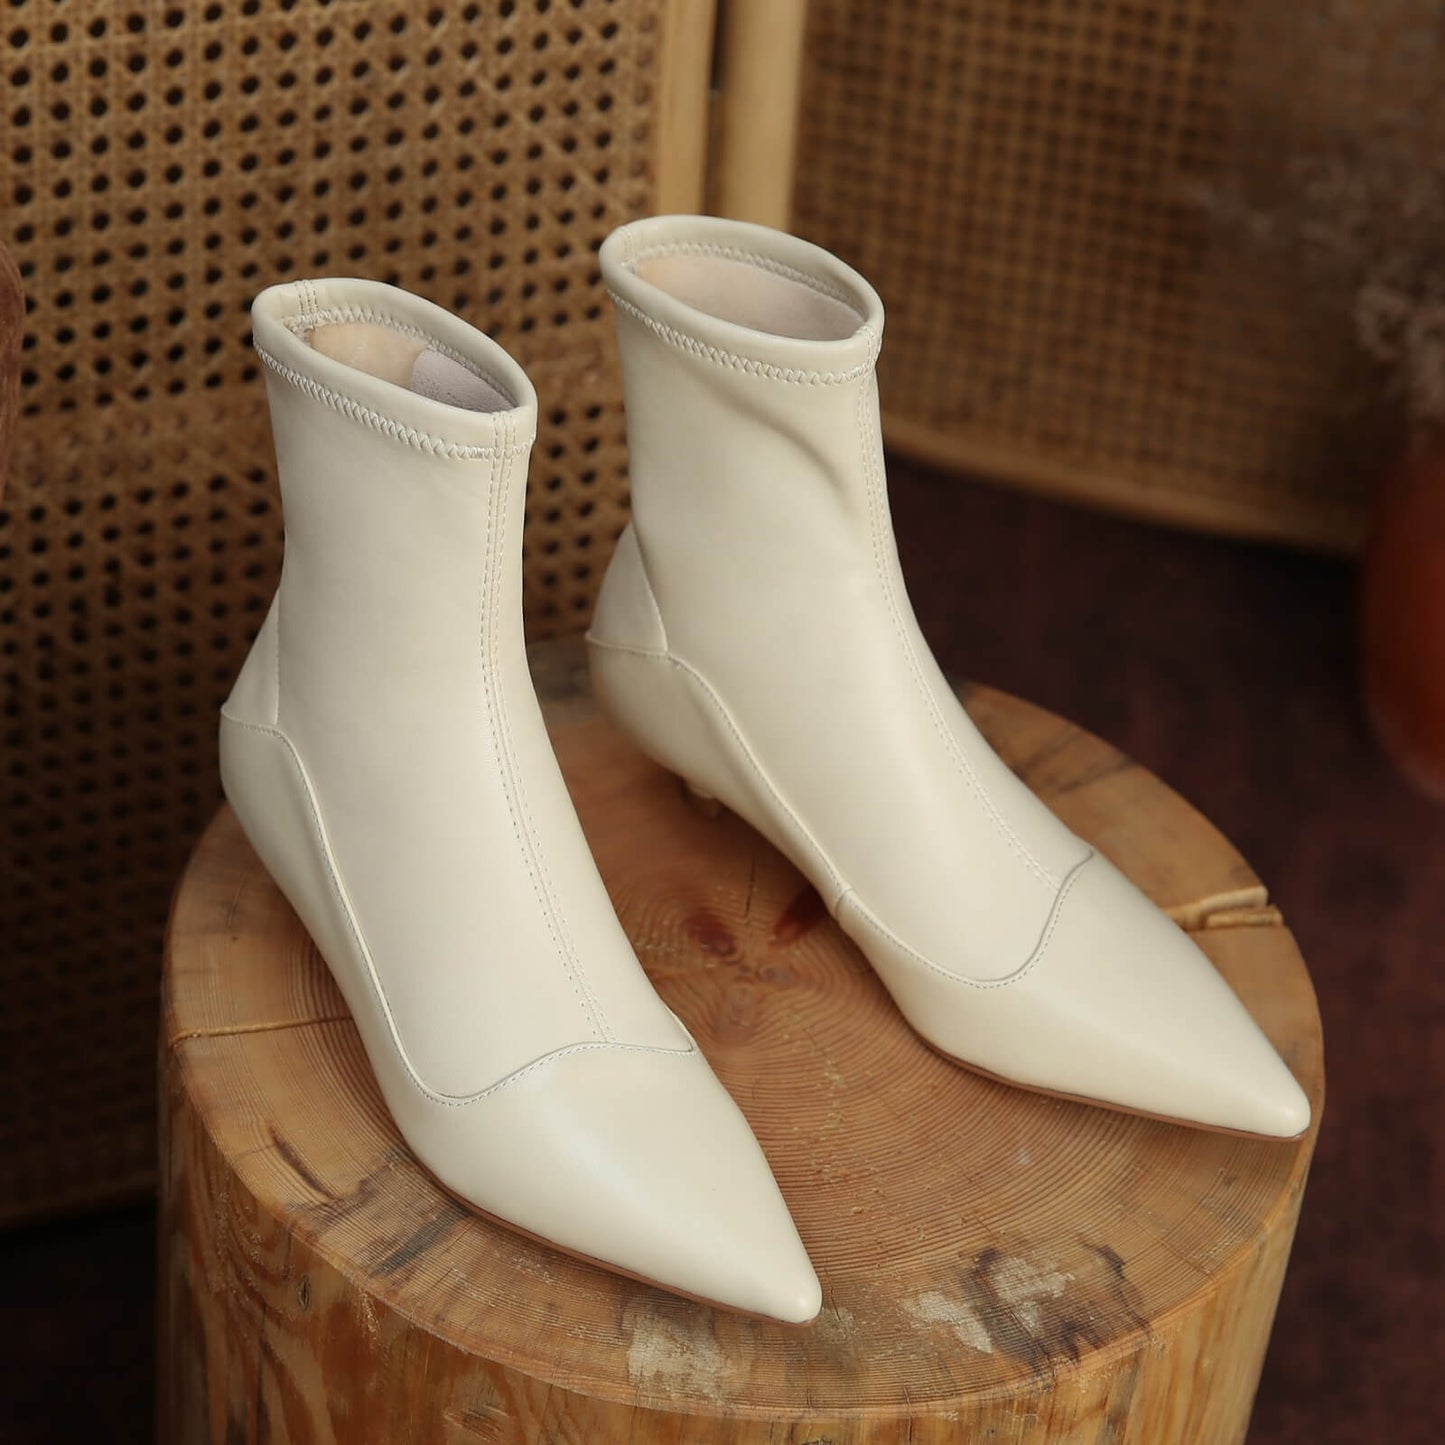 Kaly-Kitten-Heels-Pointed-Toe-Stitching-Vamp-White-Ankle-Boots-Leather